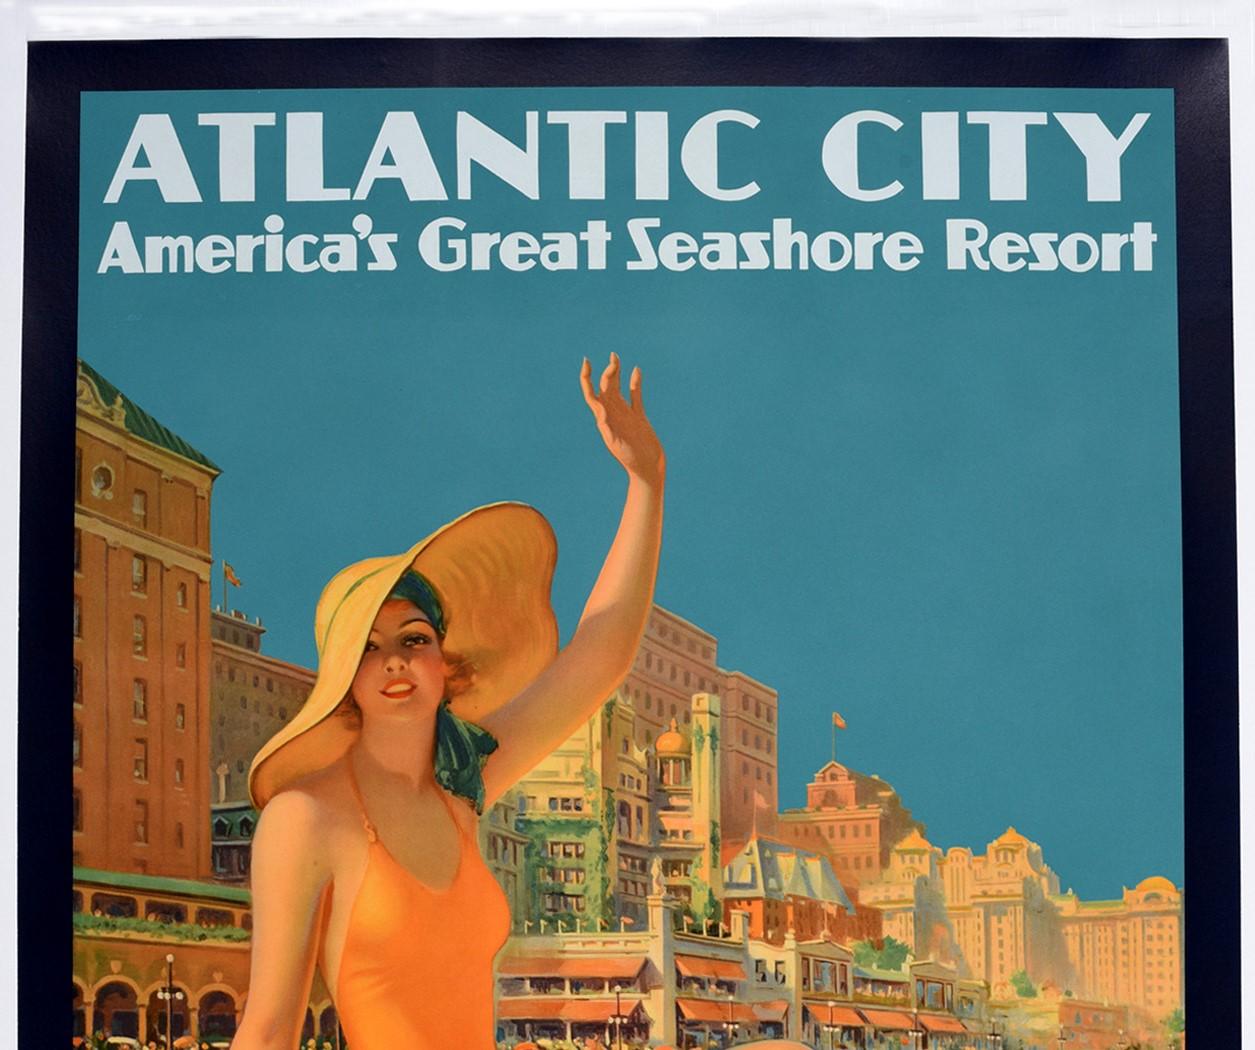 Original vintage travel advertising poster for Atlantic City America's Great Seashore Resort Pennsylvania Railroad featuring a fantastic design by Edward Eggleston (1882-1941) of a fashionable young lady wearing an orange bathing suit with green